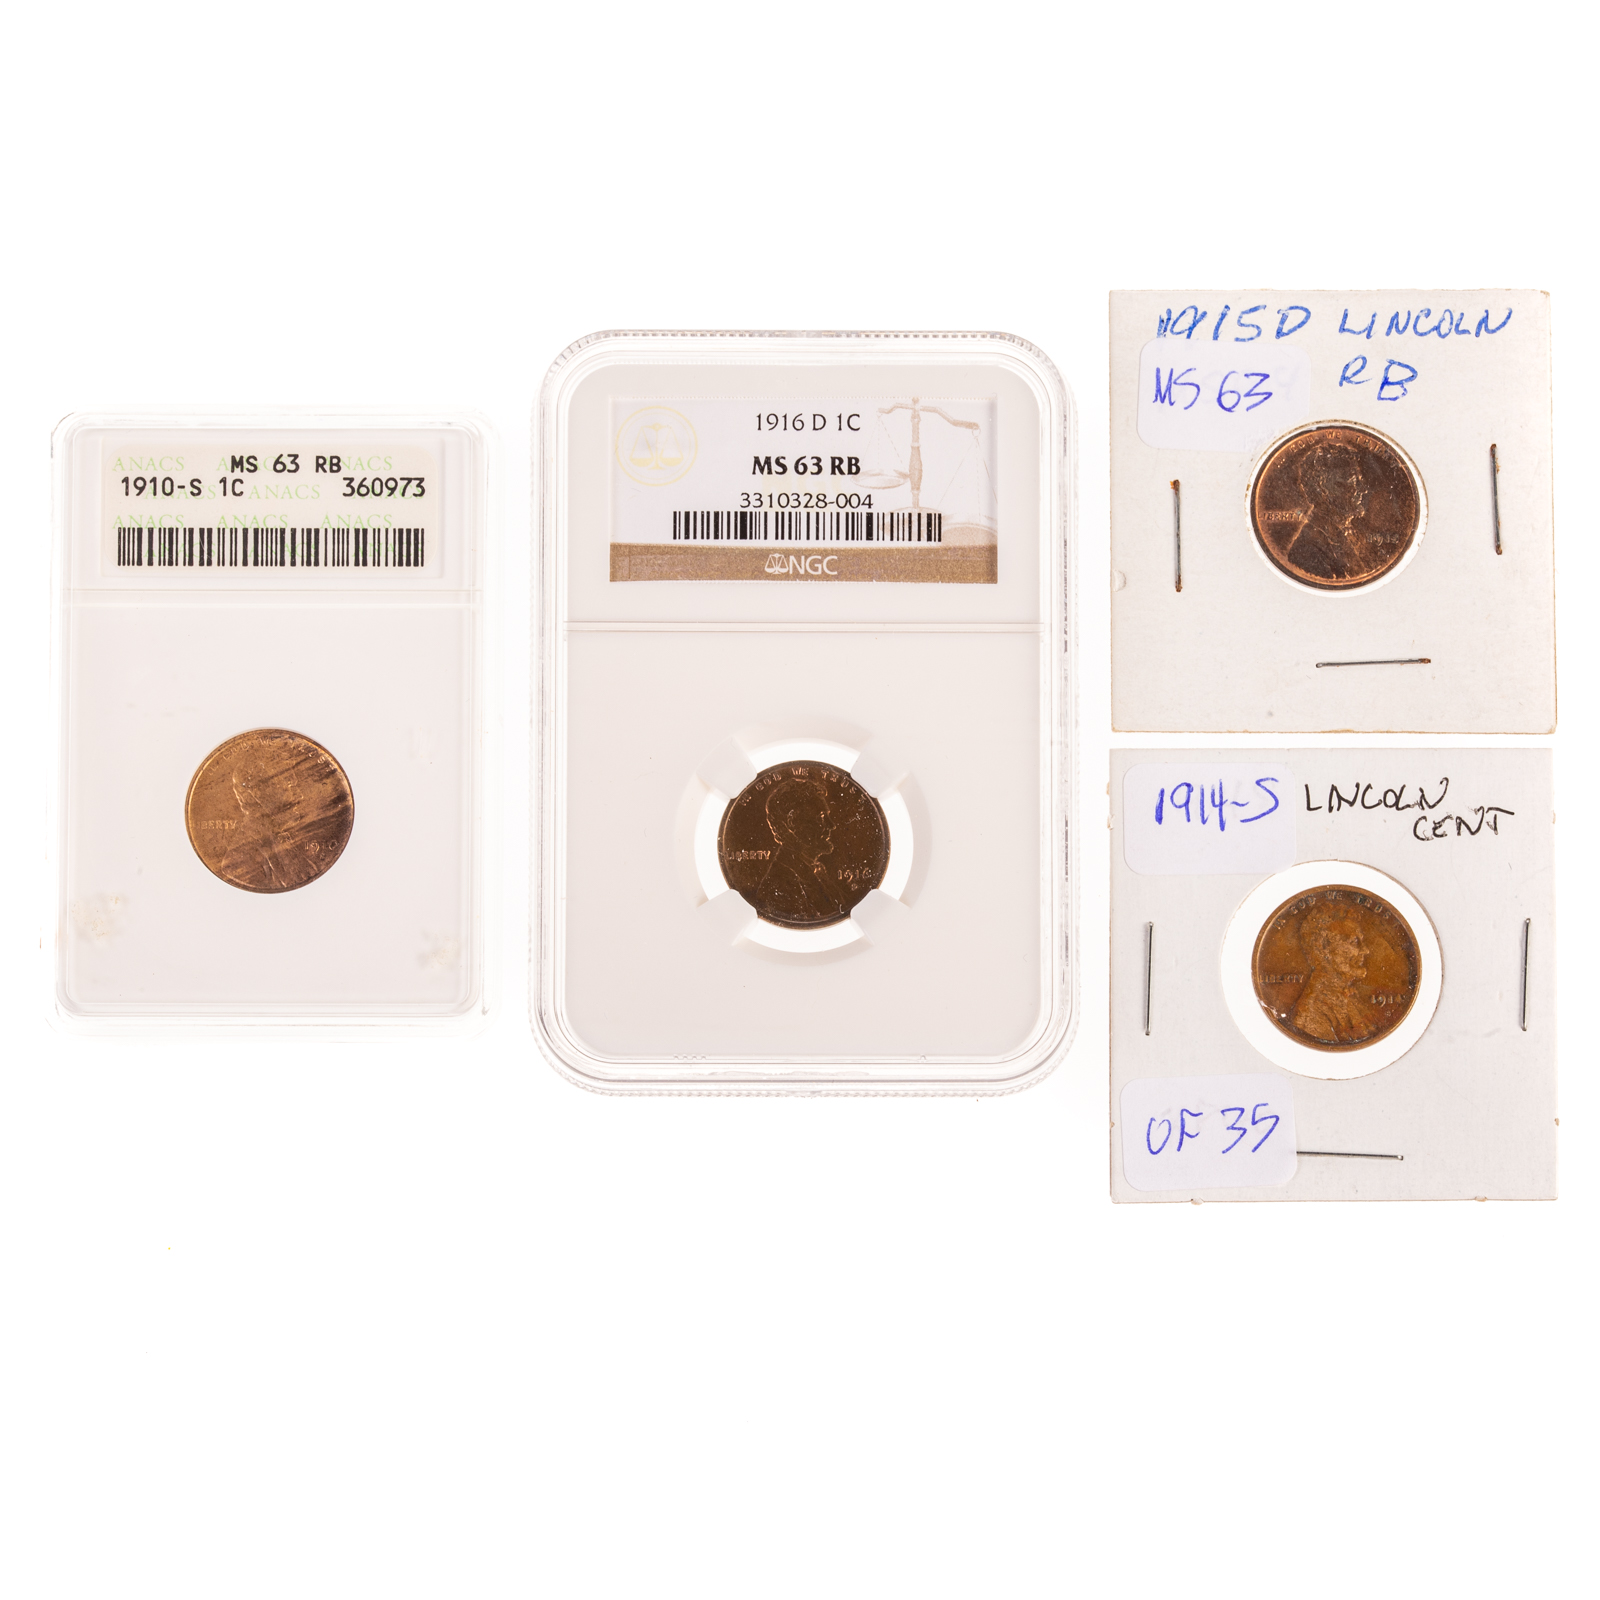 NICE GROUP OF BETTER LINCOLN CENTS 288e3c